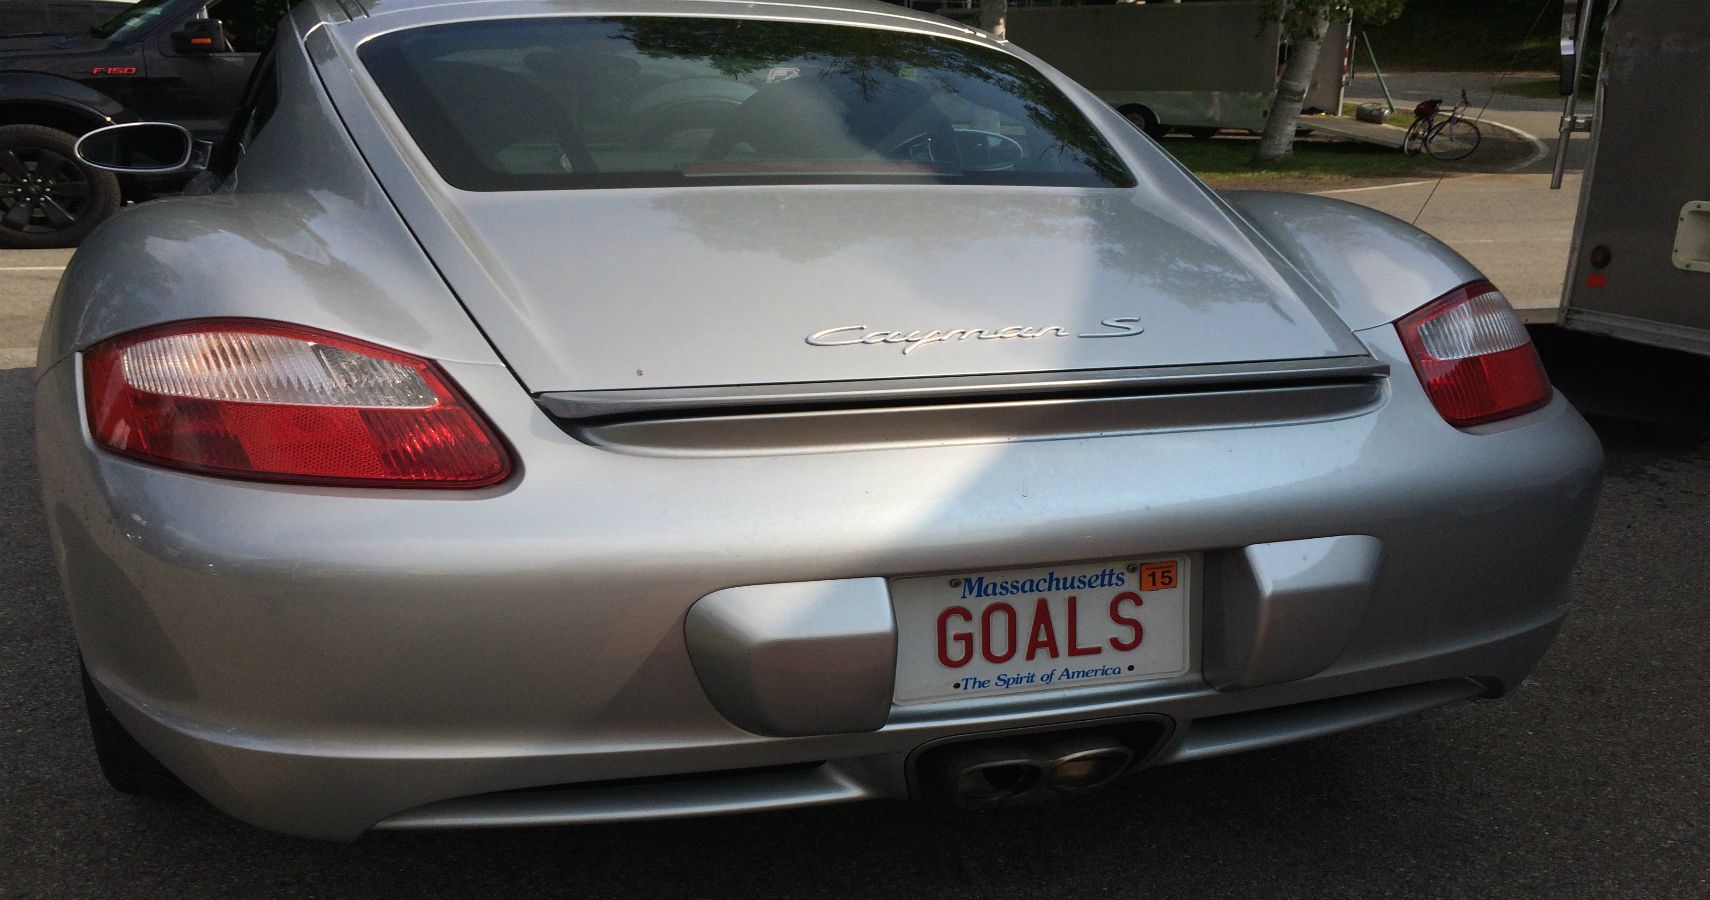 10 Clever Vanity Plates We Wish We Had Thought Of